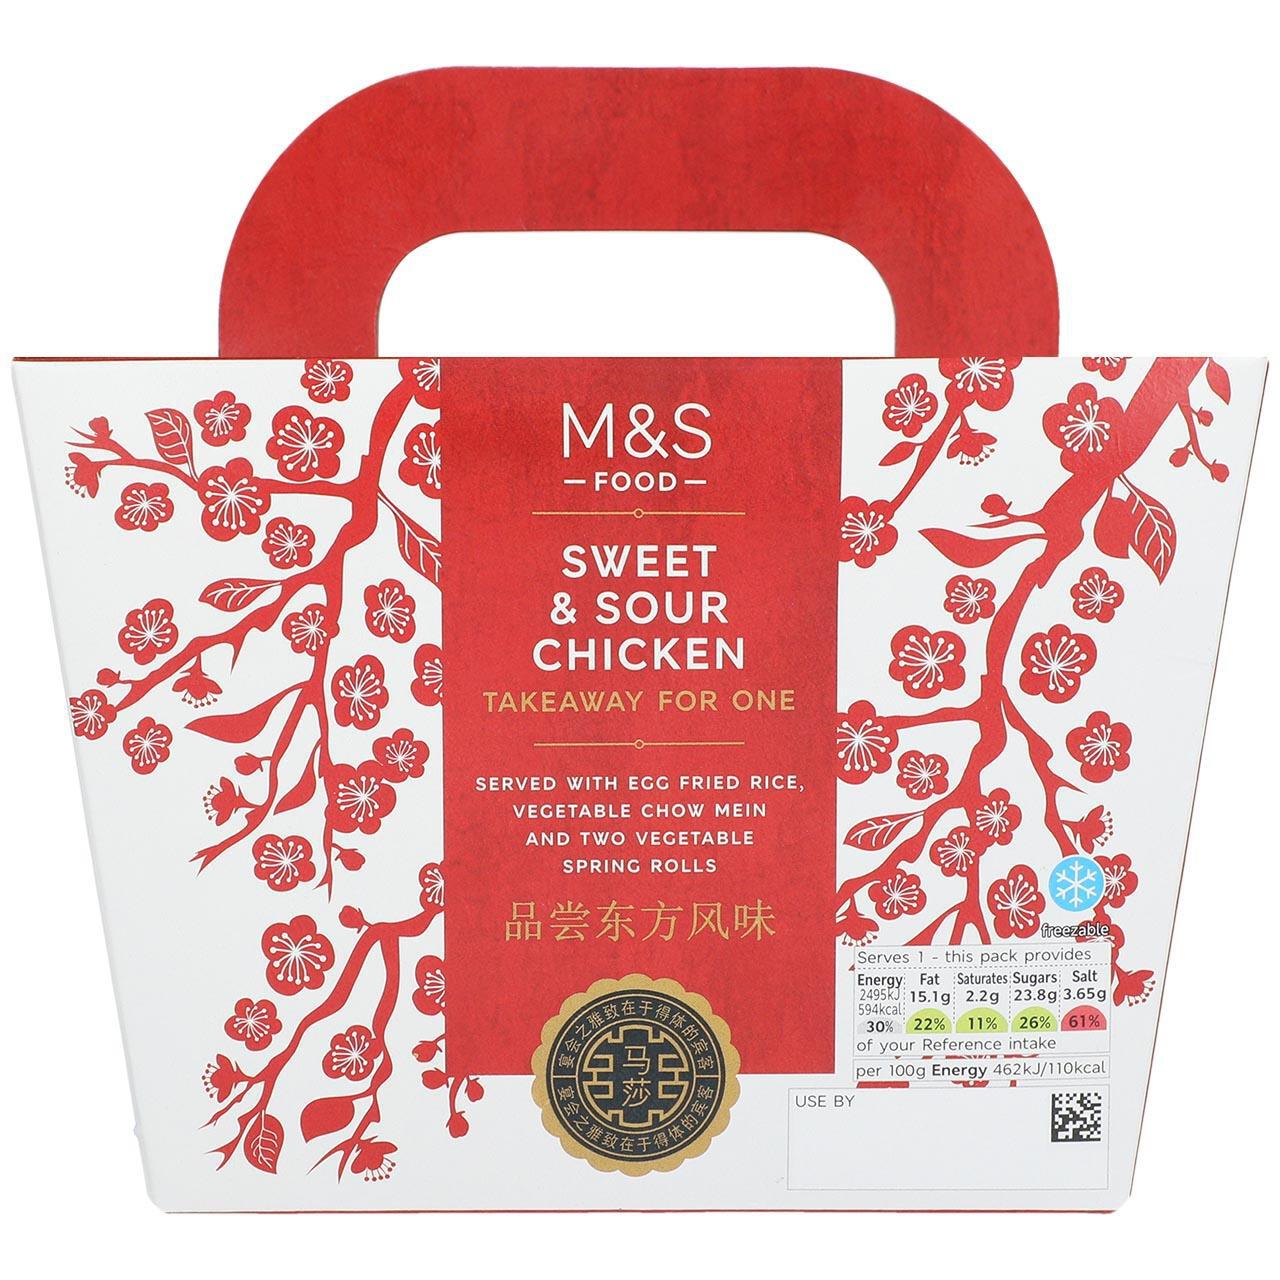 M&S Sweet & Sour Chicken Takeaway for One 540g